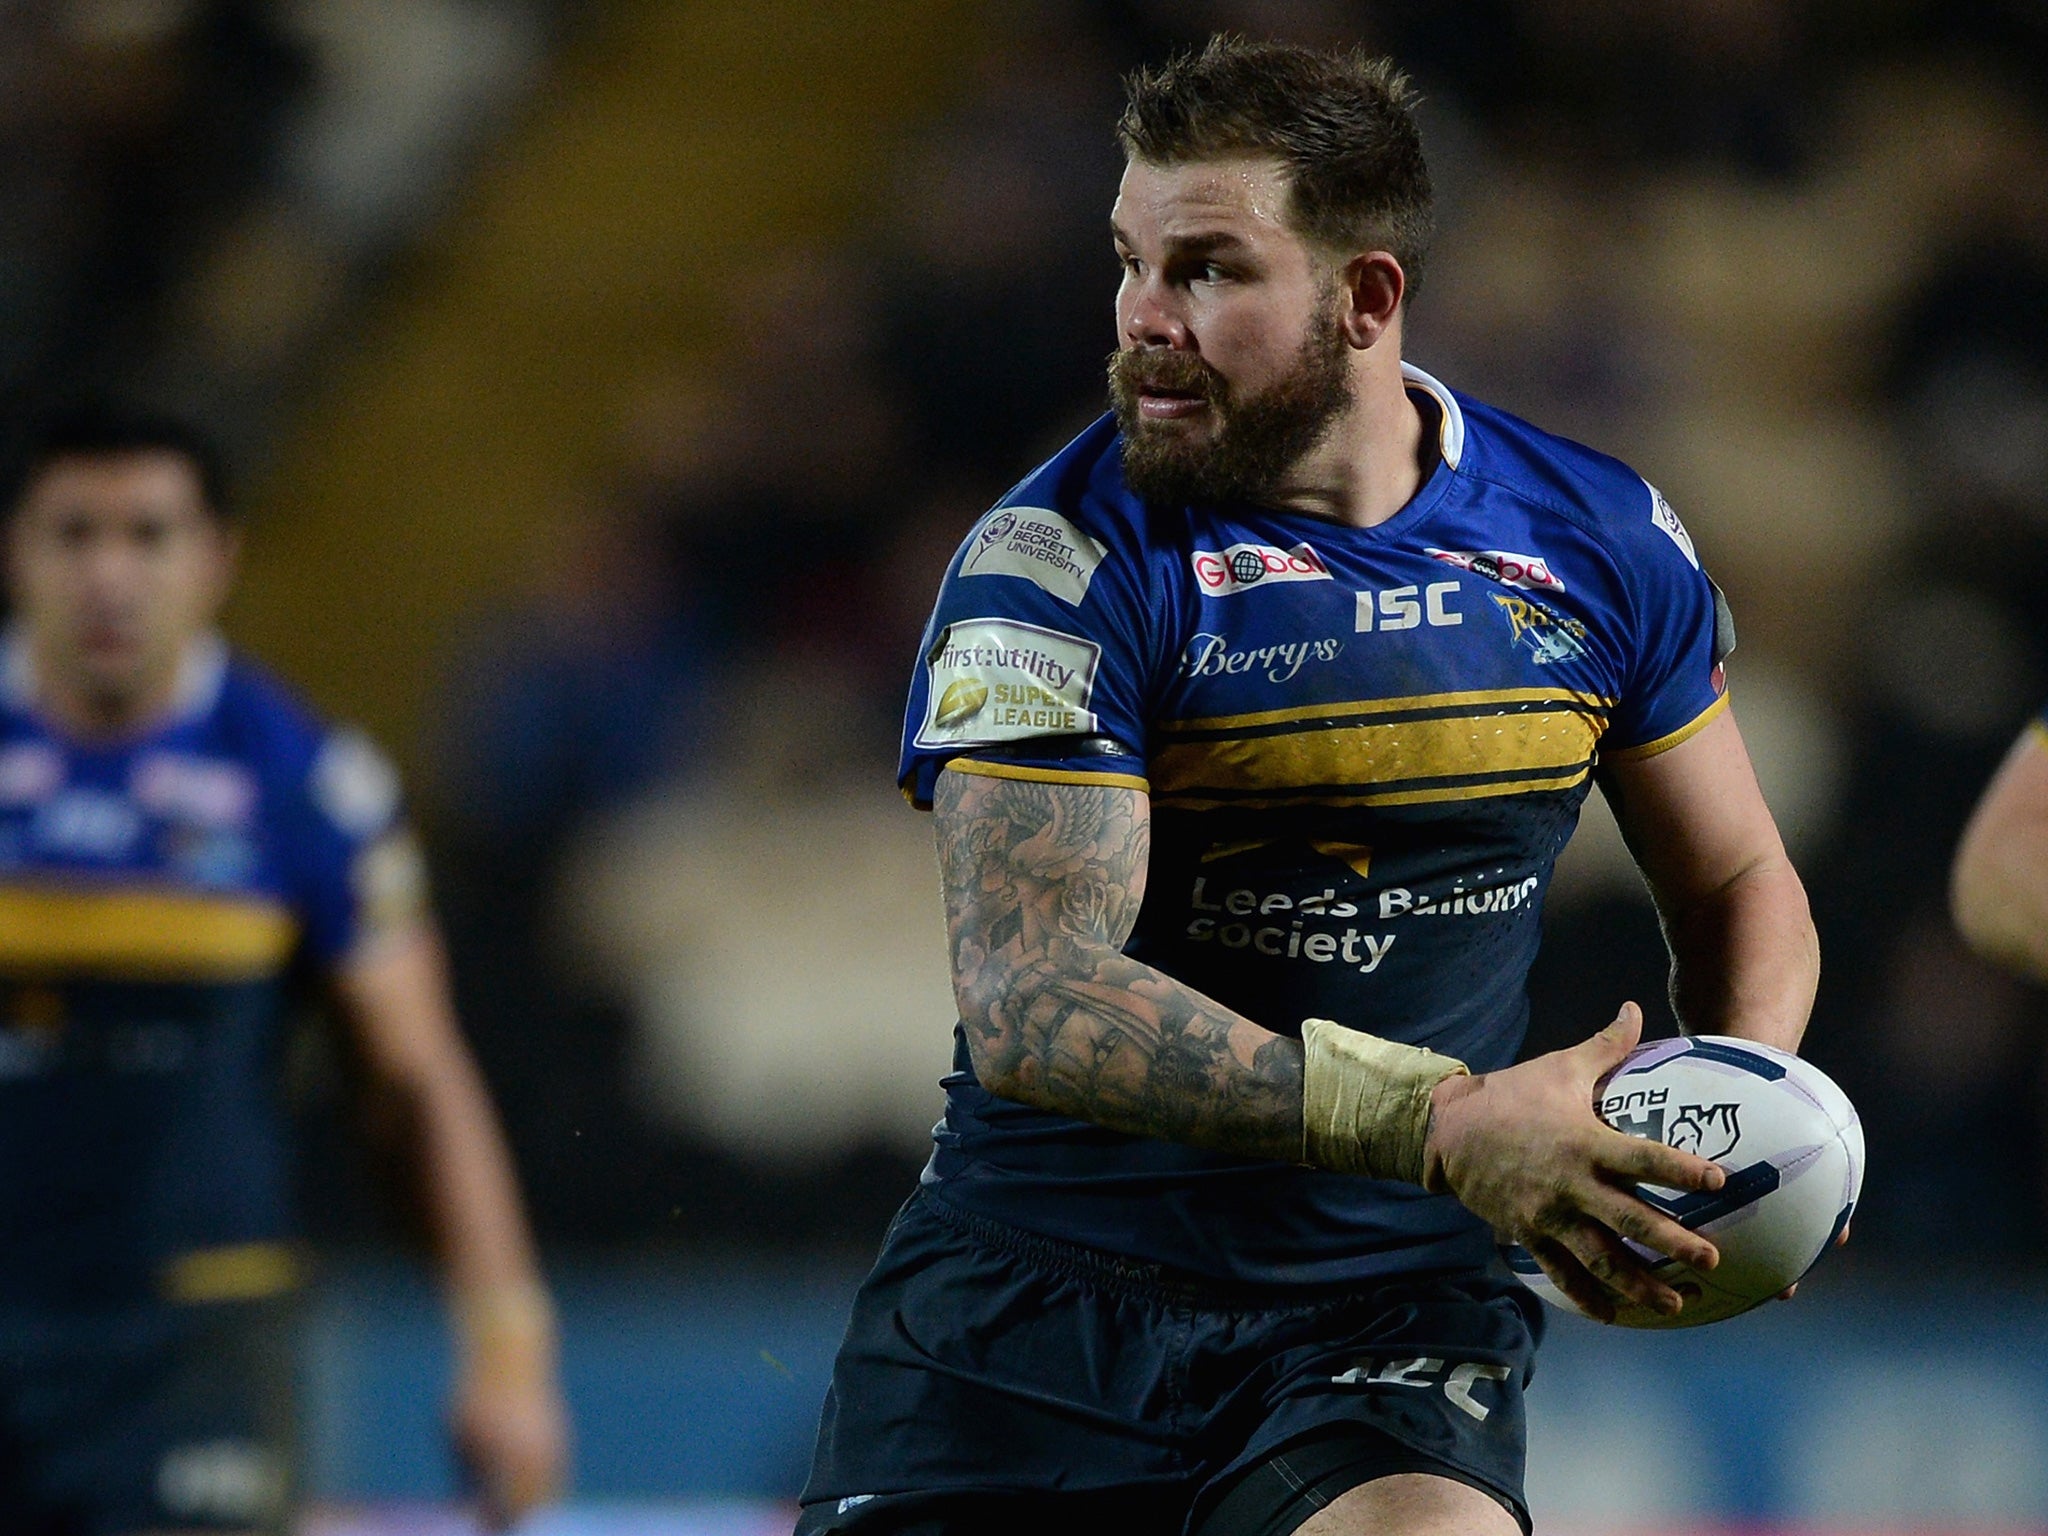 The Leeds Rhinos front-rower Adam Cuthbertson came close to quitting the game back home in Australia but is now back to his off-loading best